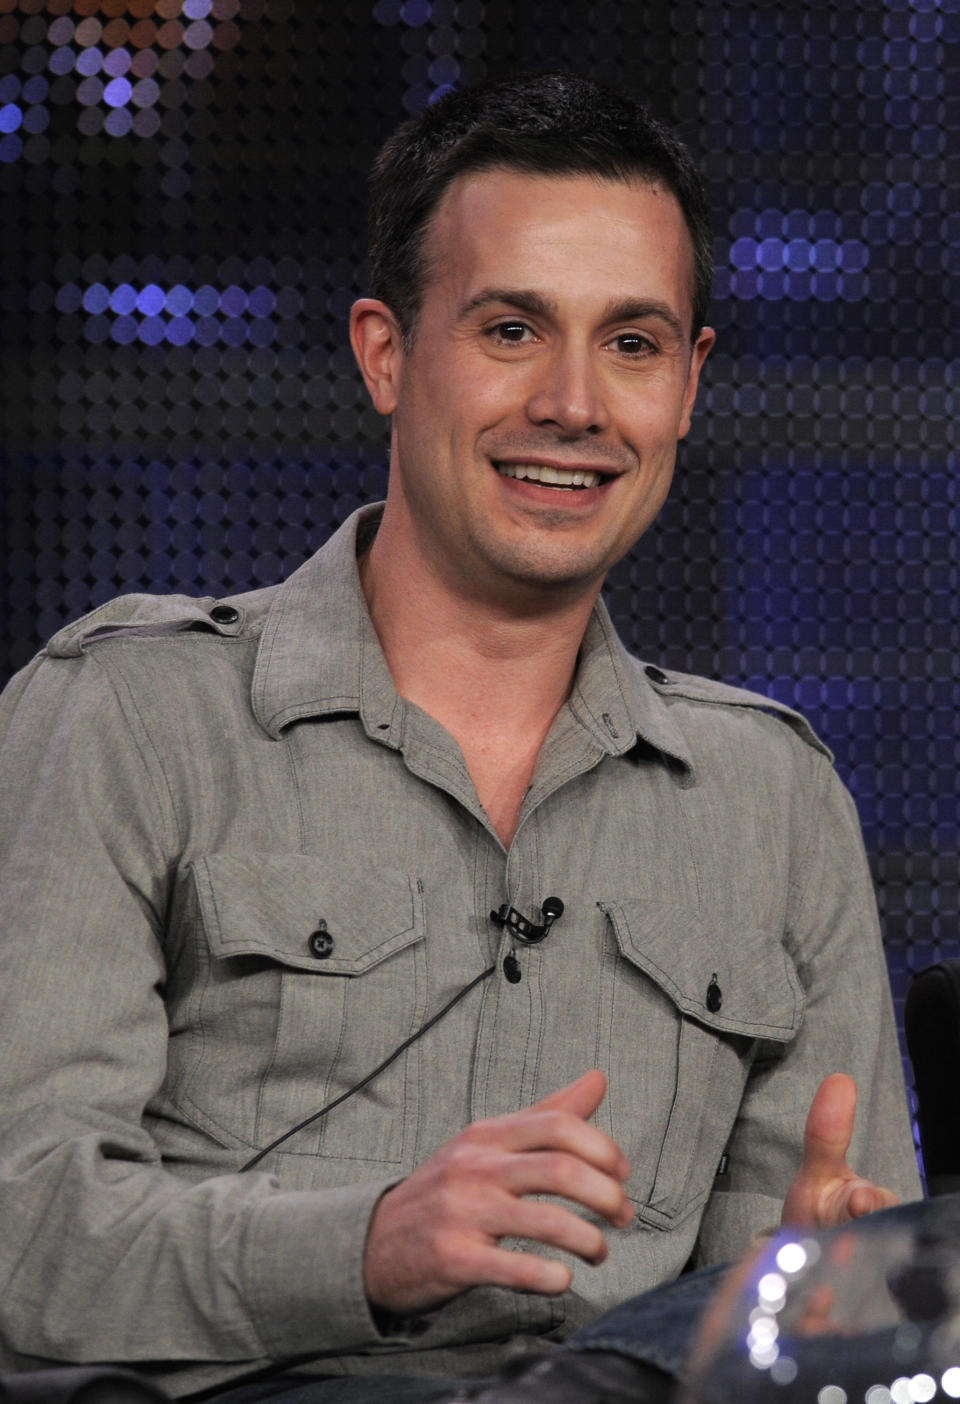 Freddie Prinze Jr., of the show 24, participates in a panel discussion at the FOX Television Critics Association winter press tour in Pasadena, Calif., Monday, Jan. 11, 2010. (AP Photo/Chris Pizzello)